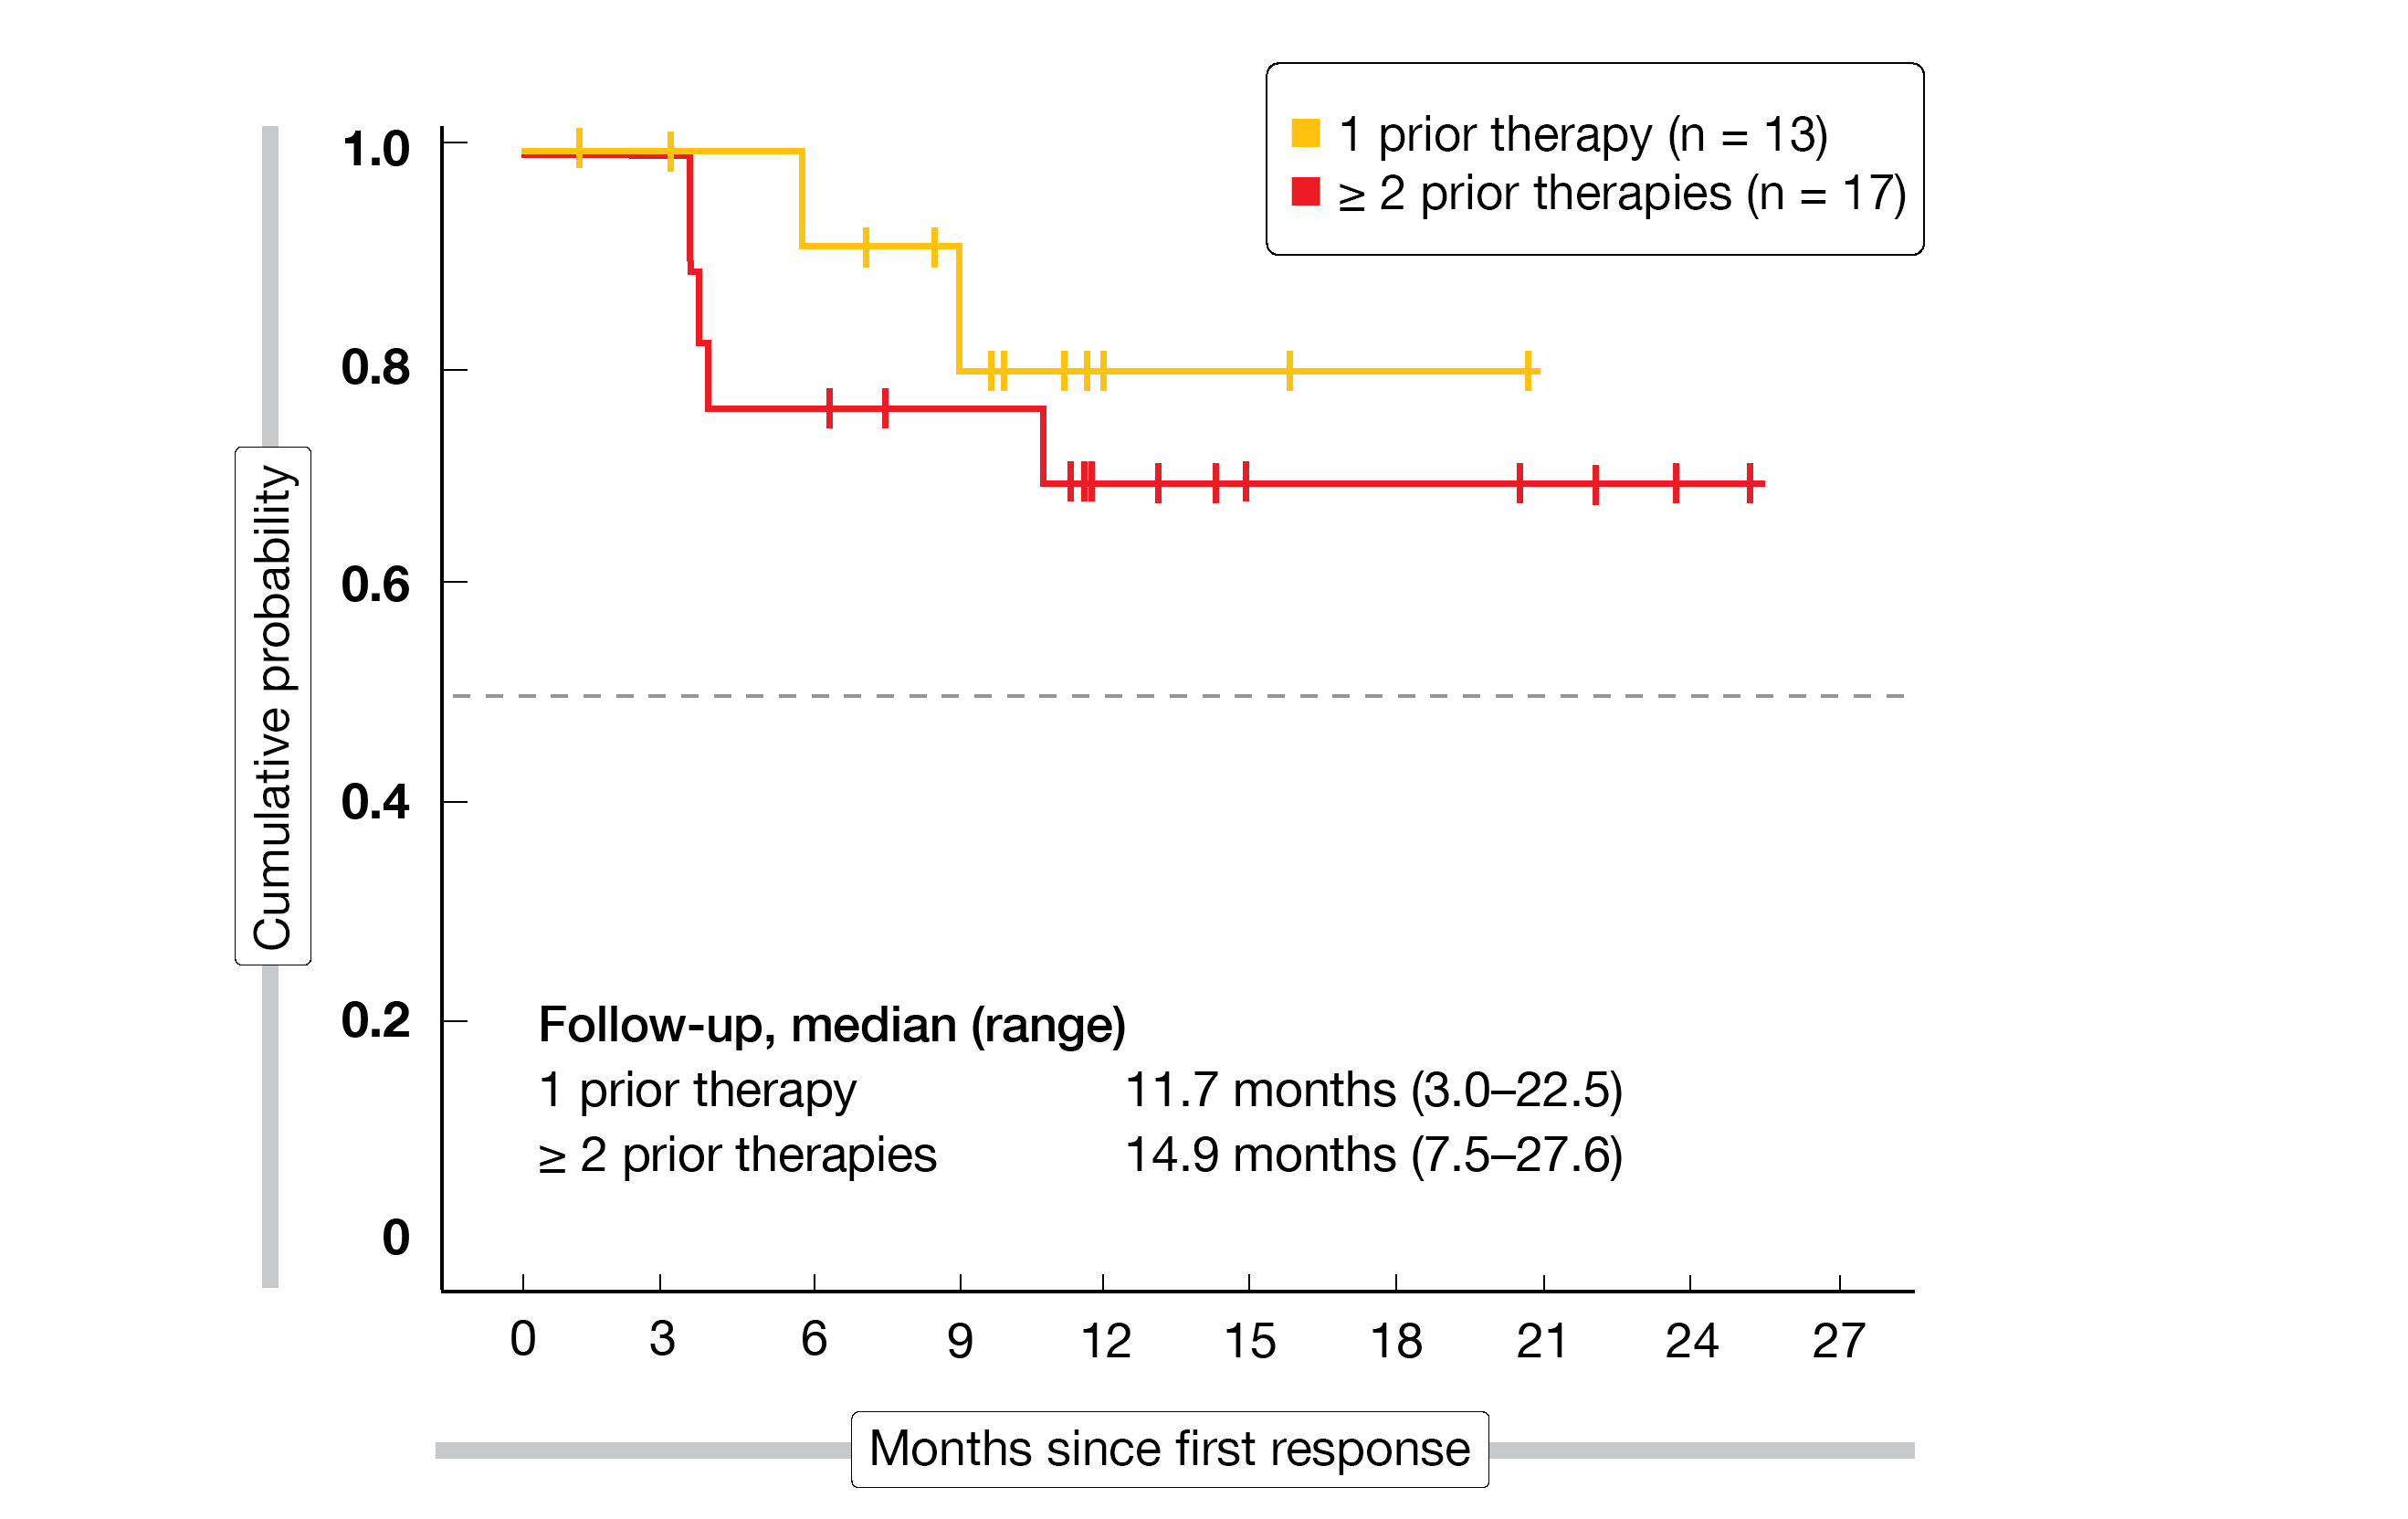 Figure: Duration of response with the PI3Kδ inhibitor ME-401 according to the line of treatment